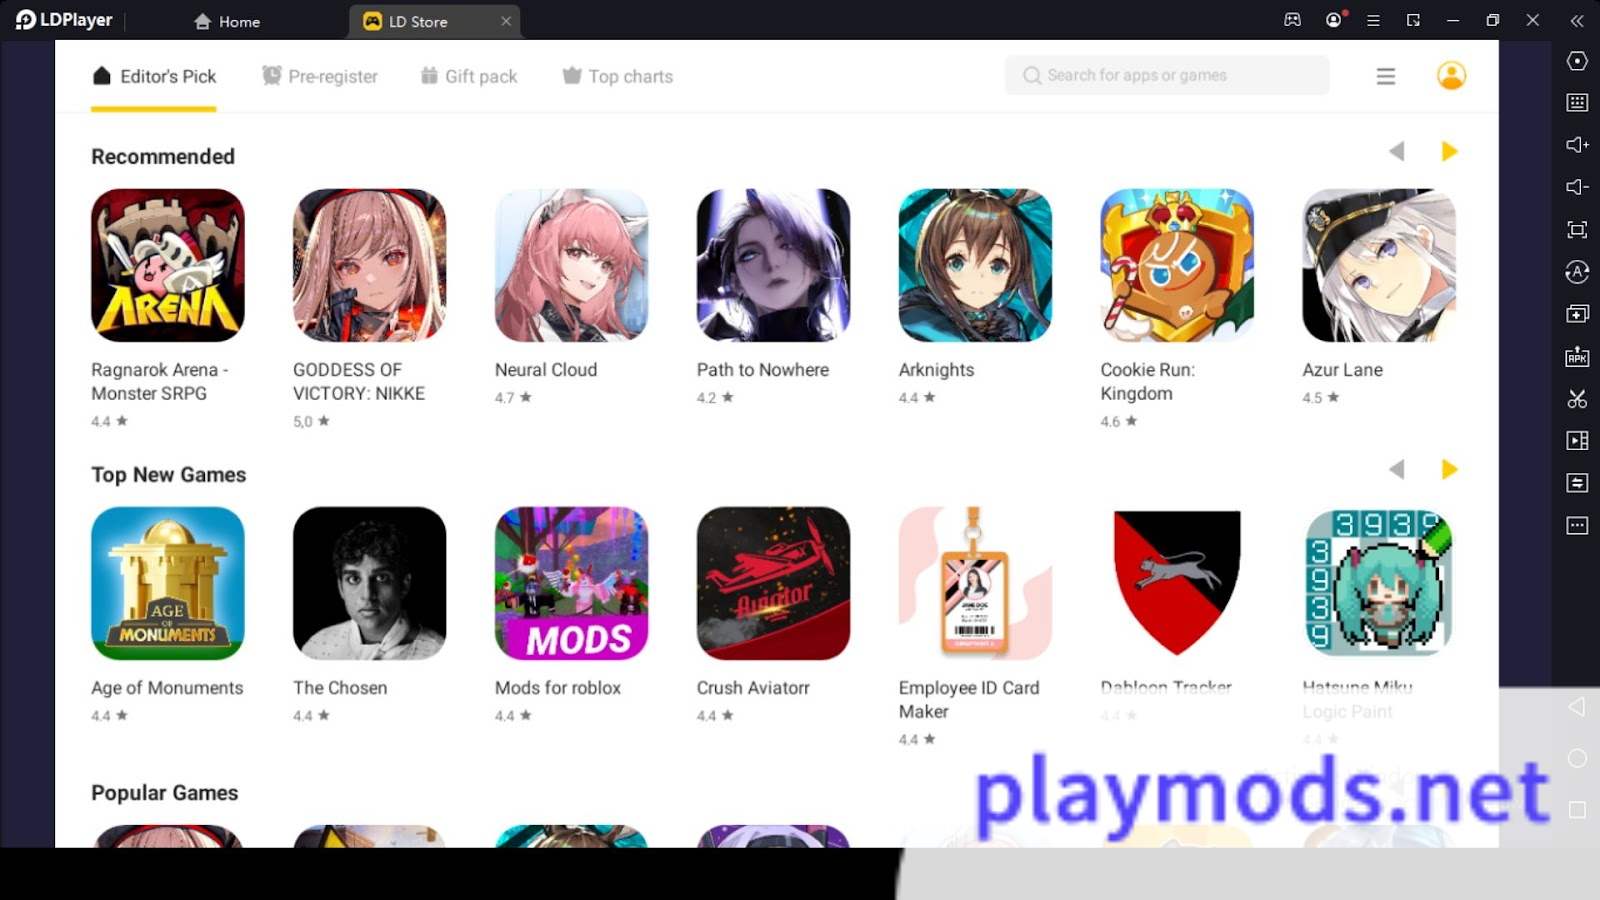 LDPlayer is the best Android emulator that allows you to play mobile games on a PC